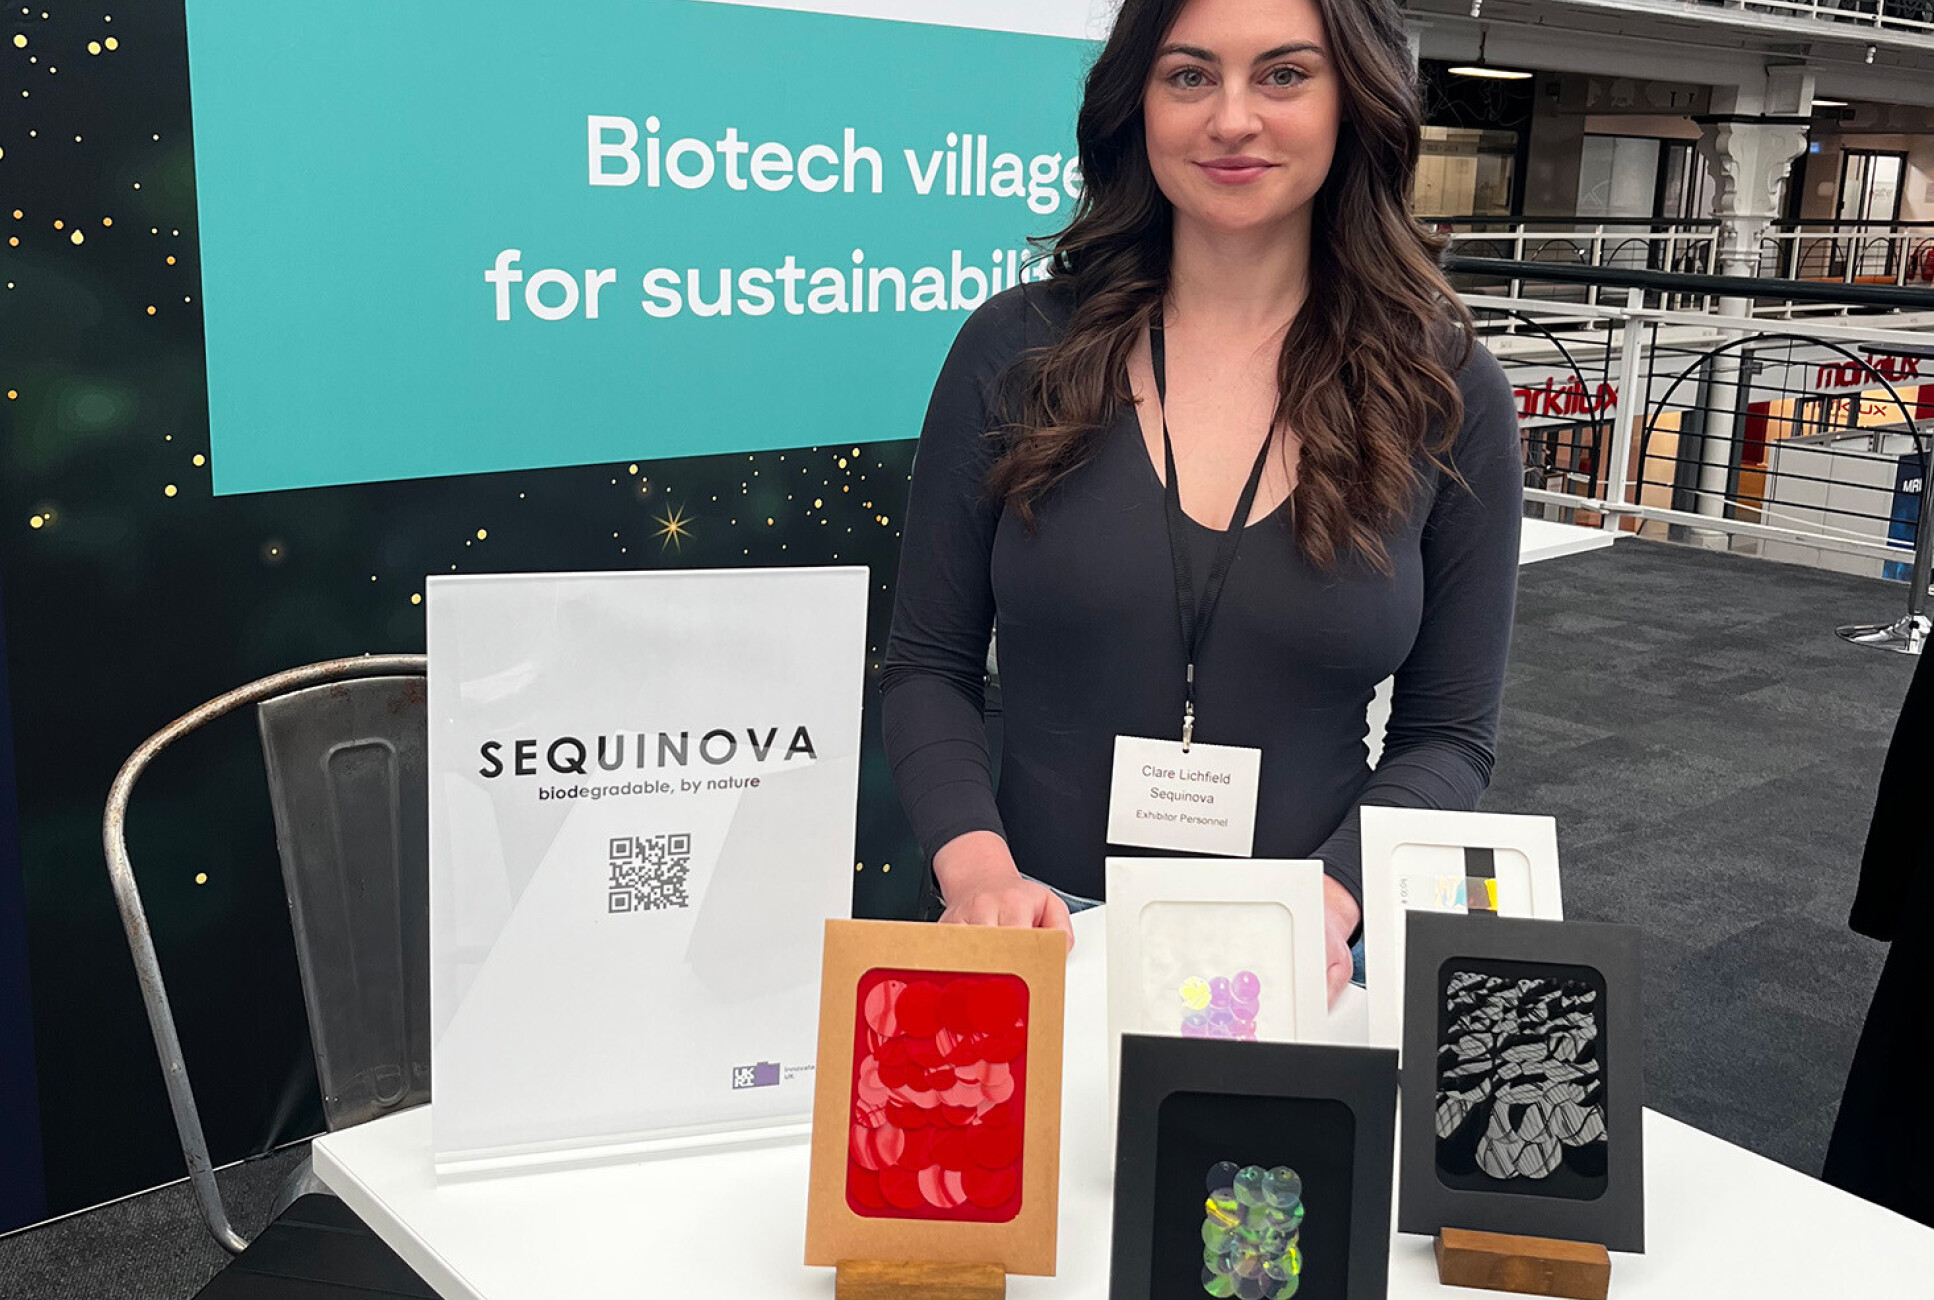 Clare Lichfield from Sequinova showcasing its biodegradable sequin textiles and glitter